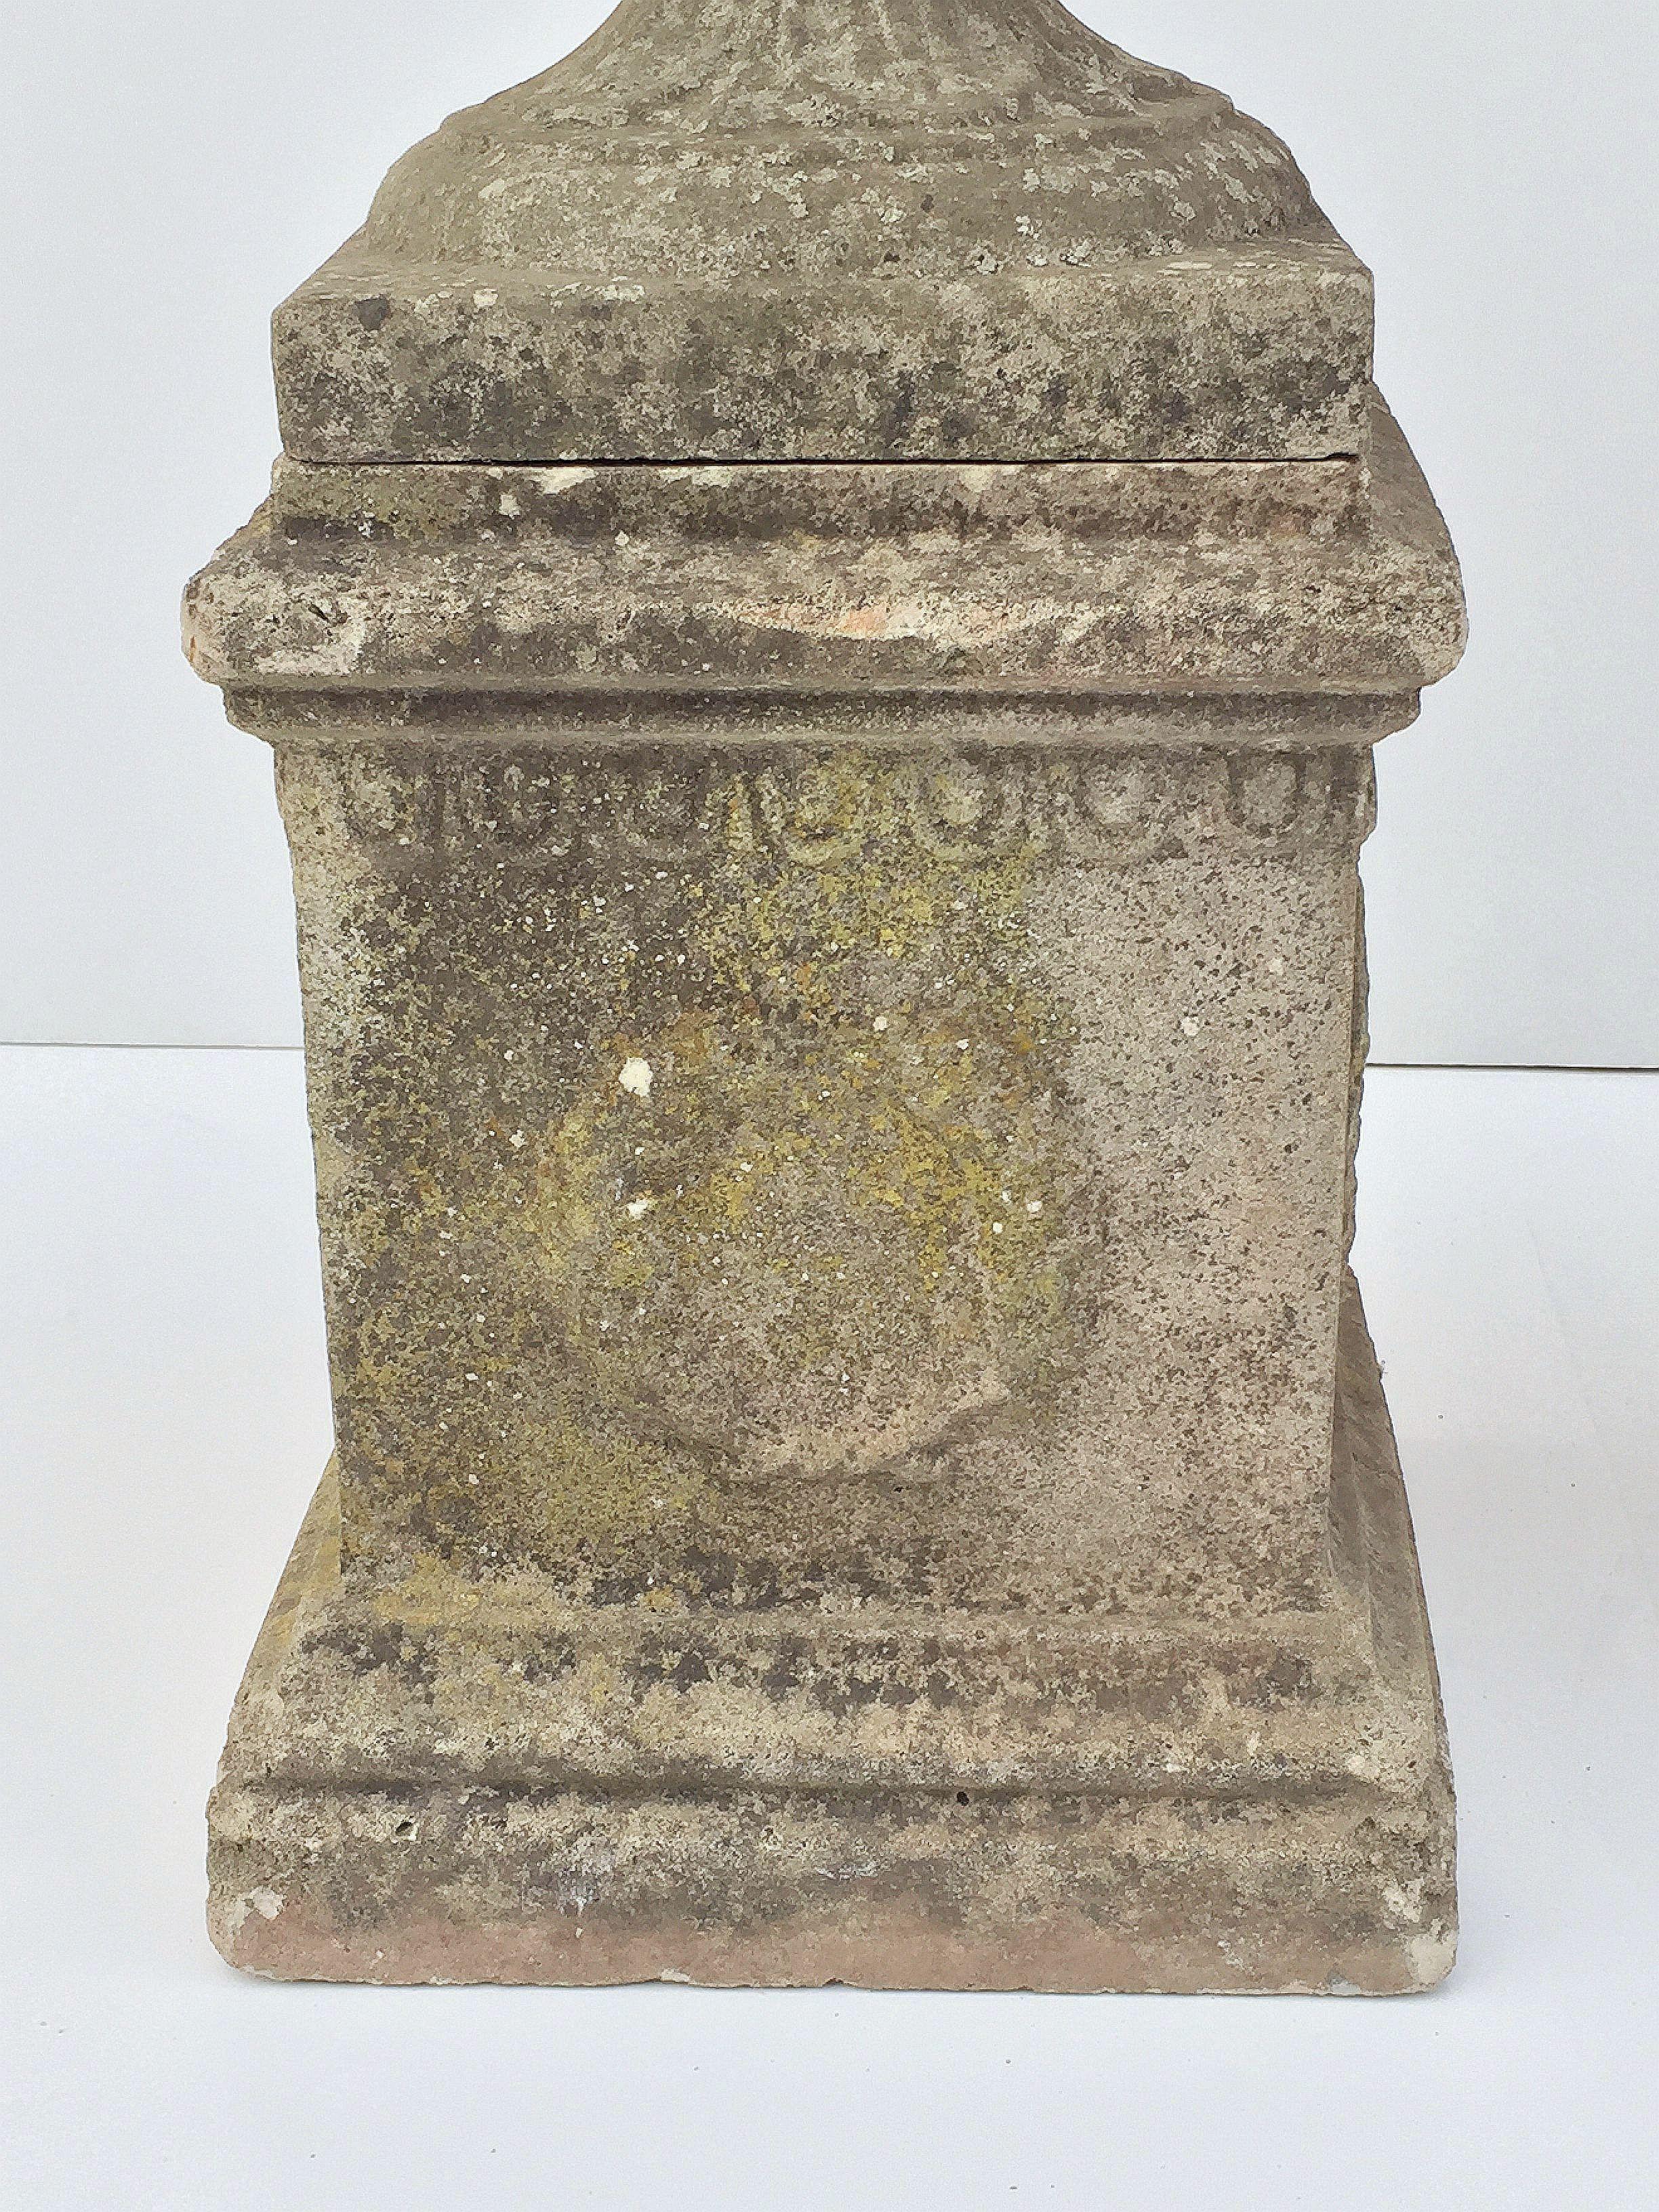 Pair of English Garden Stone Urns on Plinths with Garlands 'Individually Priced' 11